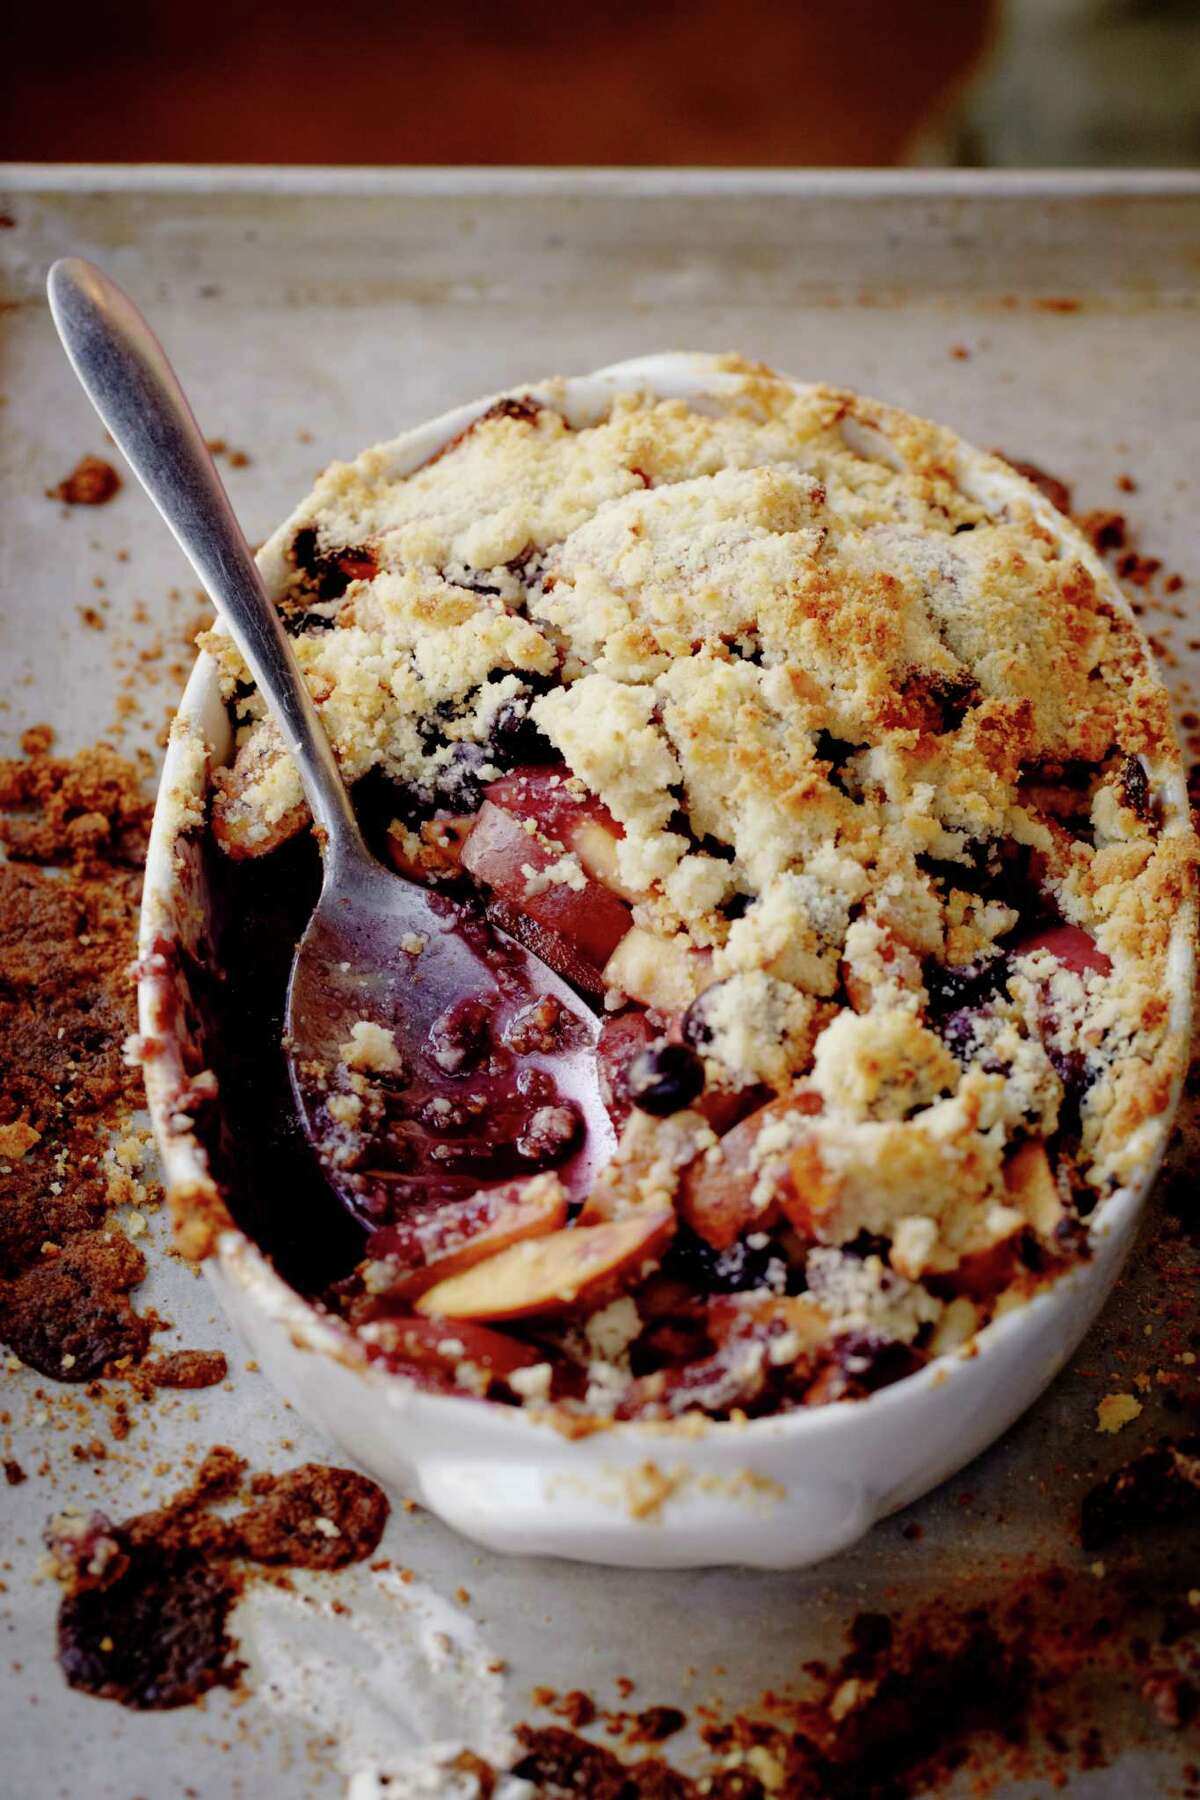 The Huckleberry Cafe shared its recipe for the Blueberry Nectarine Crisp.